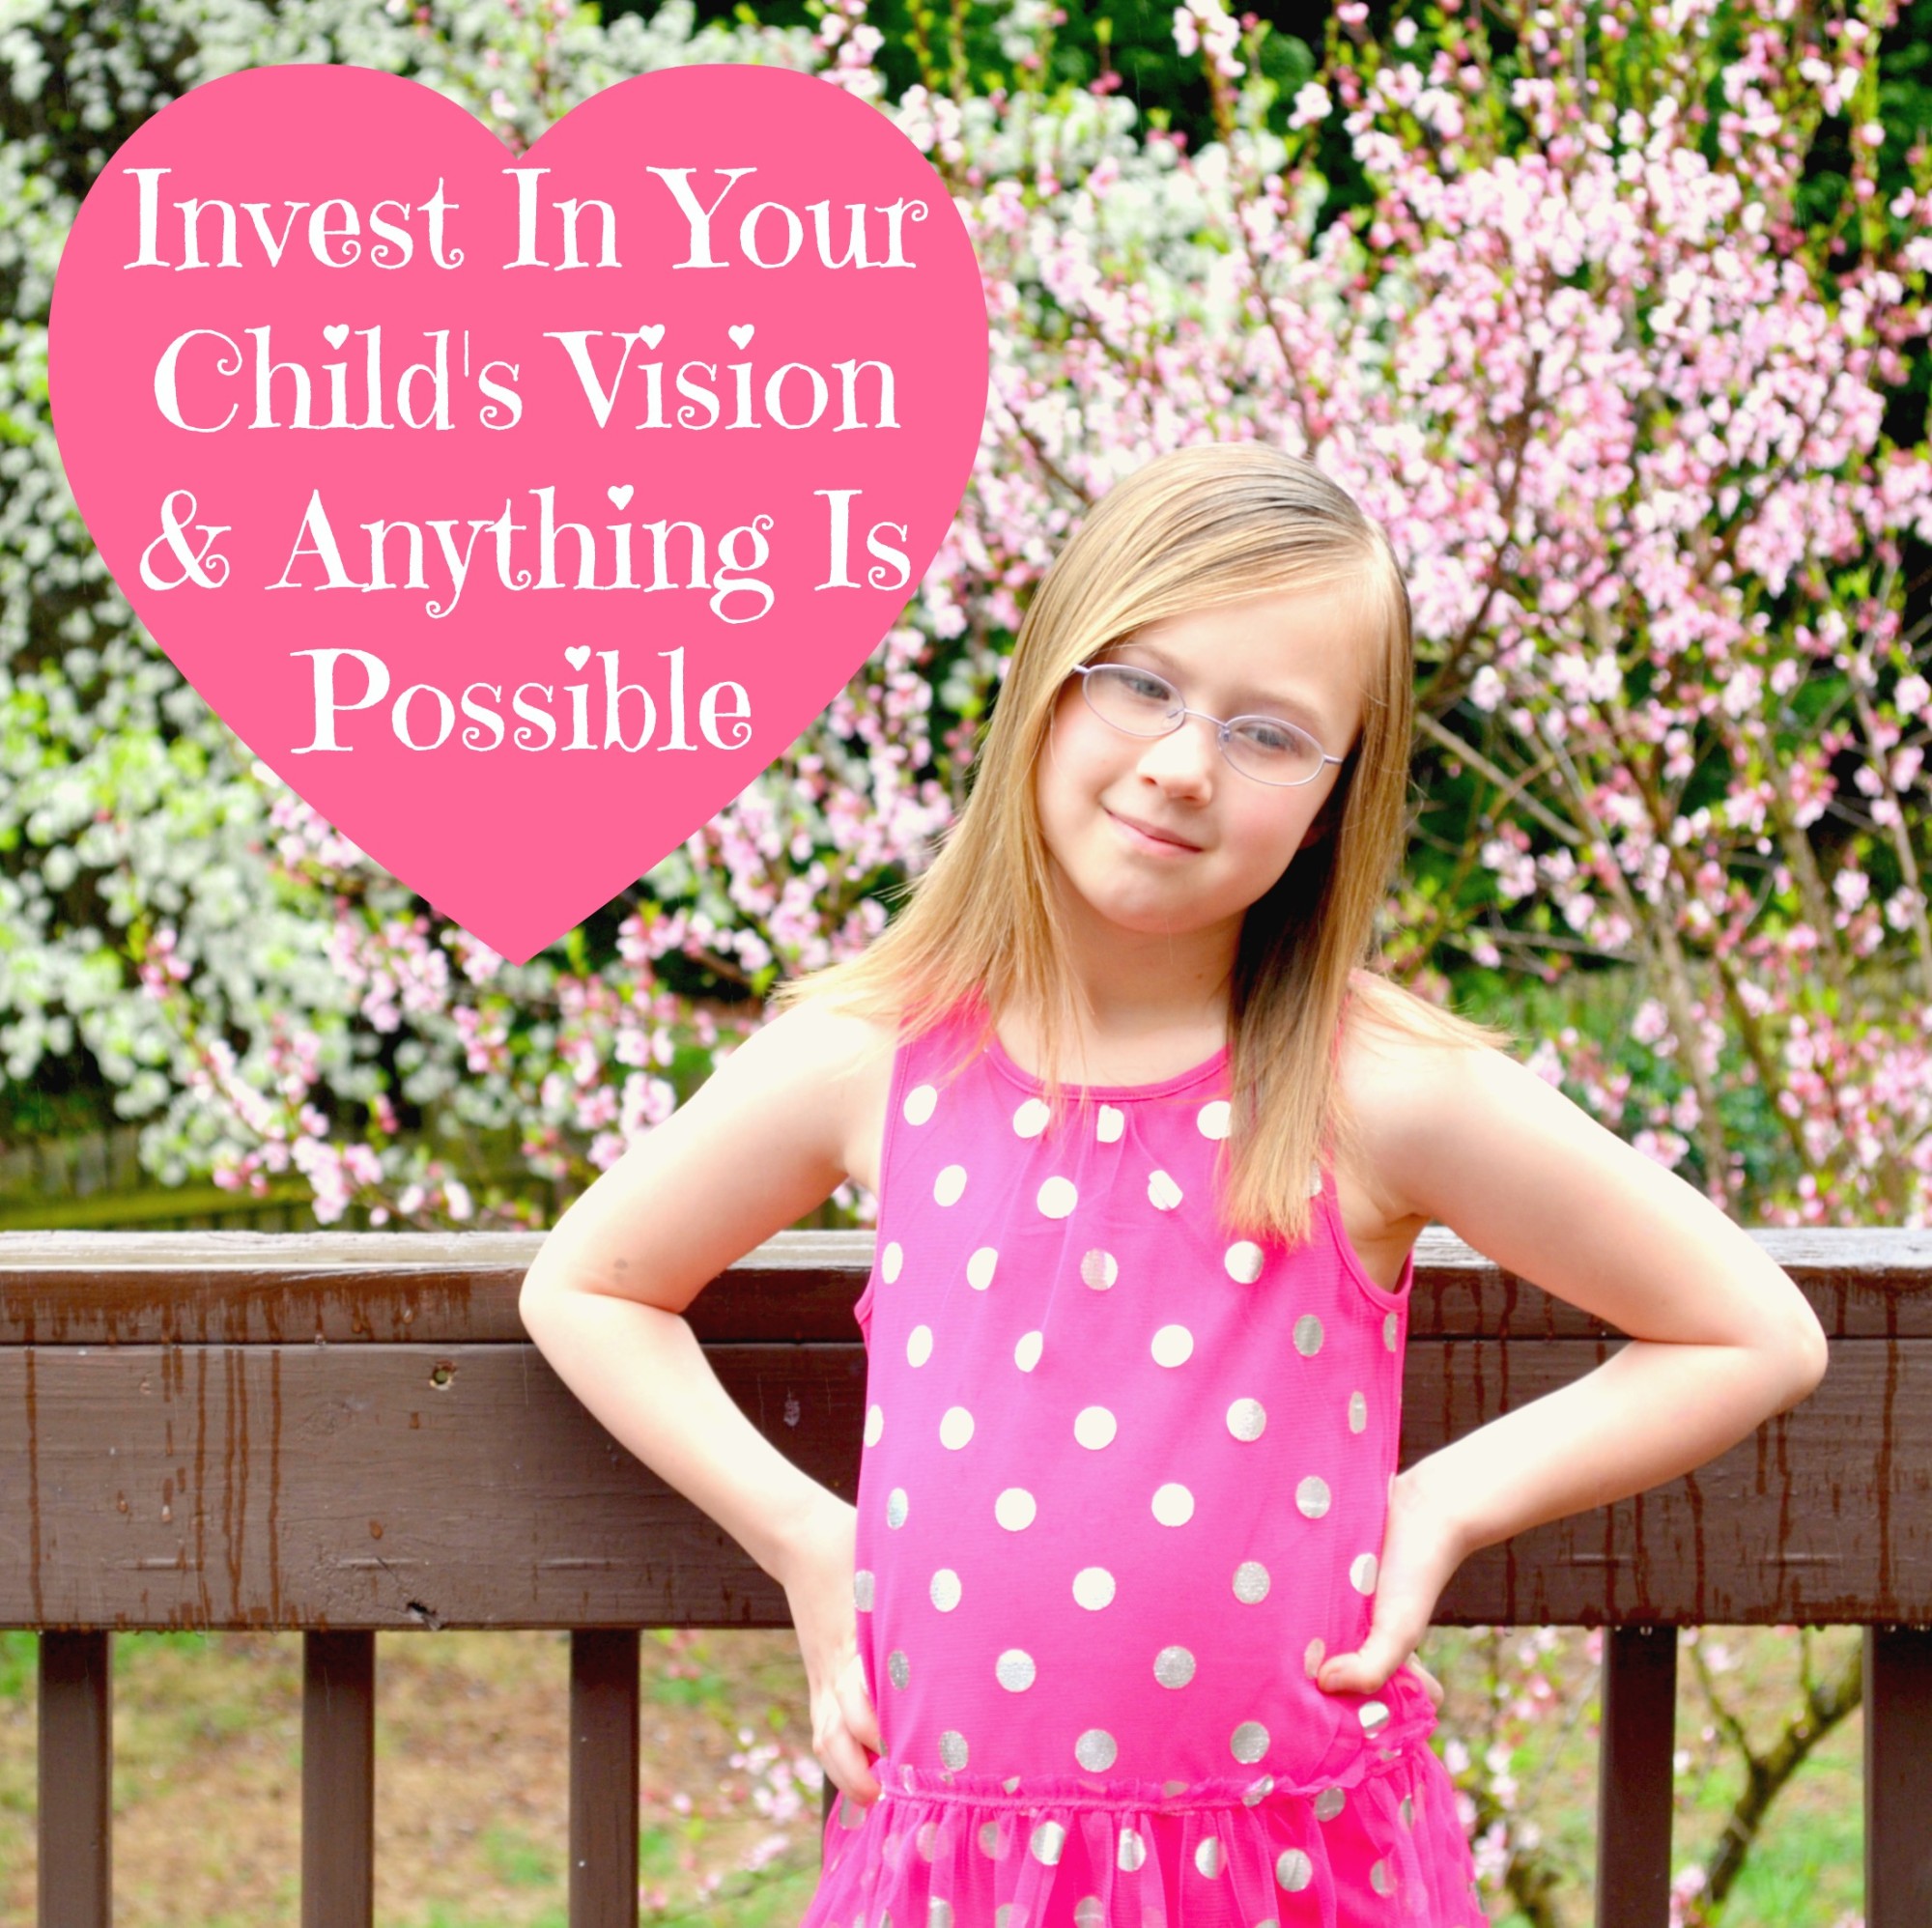 Invest In Your Child's Vision & Anything Is Possible #EyeGiveBack